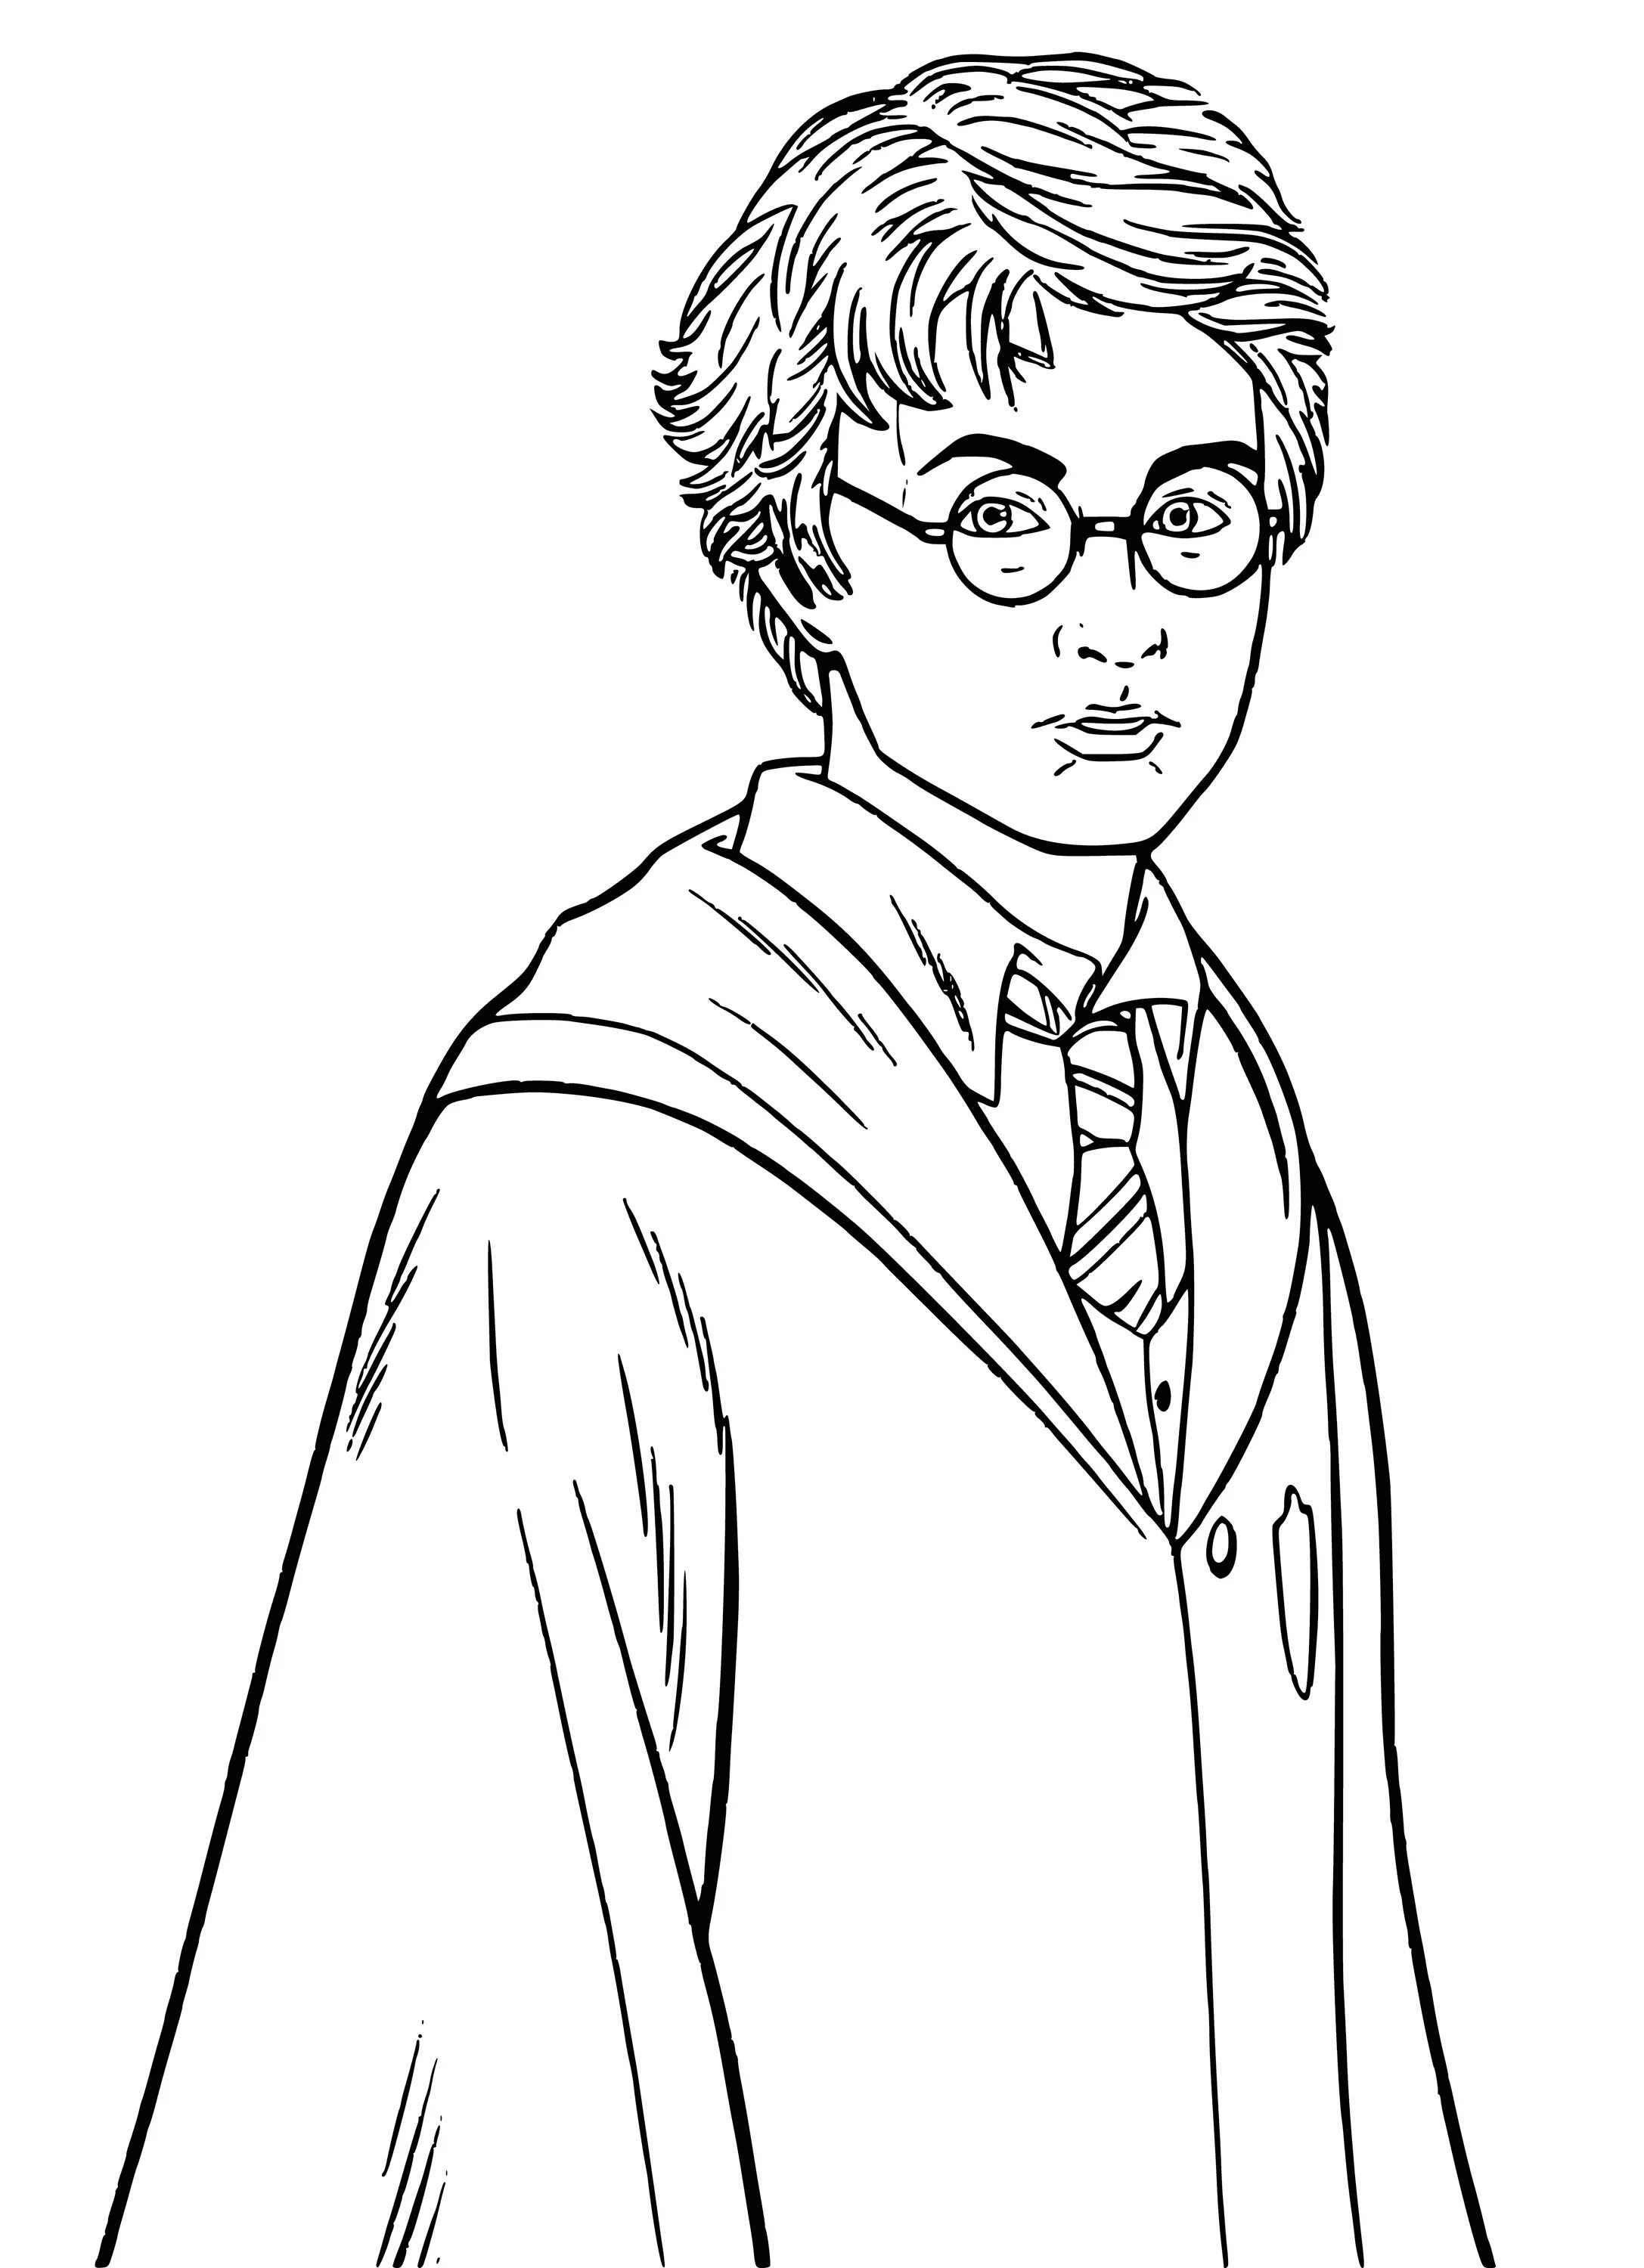 Harry potter drawing #5